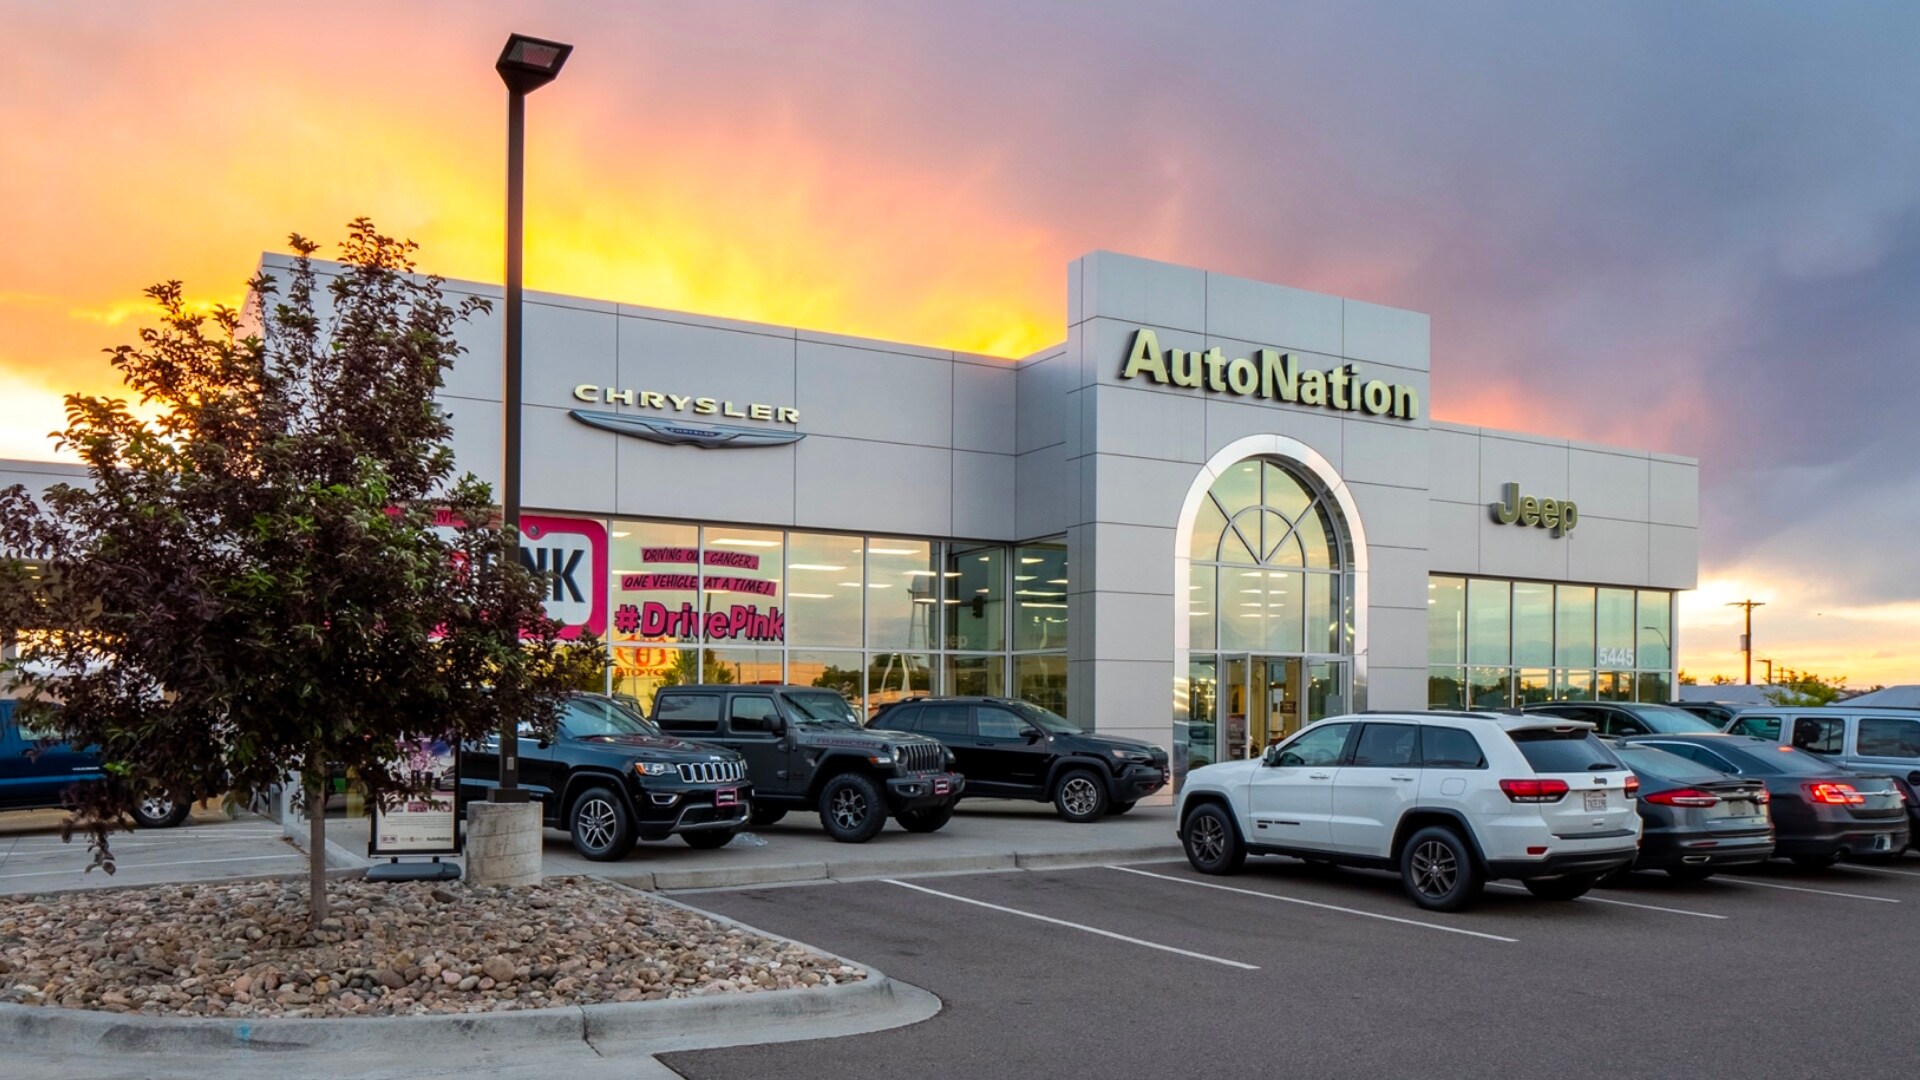 Exterior view of Autonation Chrysler Jeep Broadway during a sunrise or sunset. Many vehicles parked near the grey building. Trees and greenery are visible around the parking lot and surrounding area.